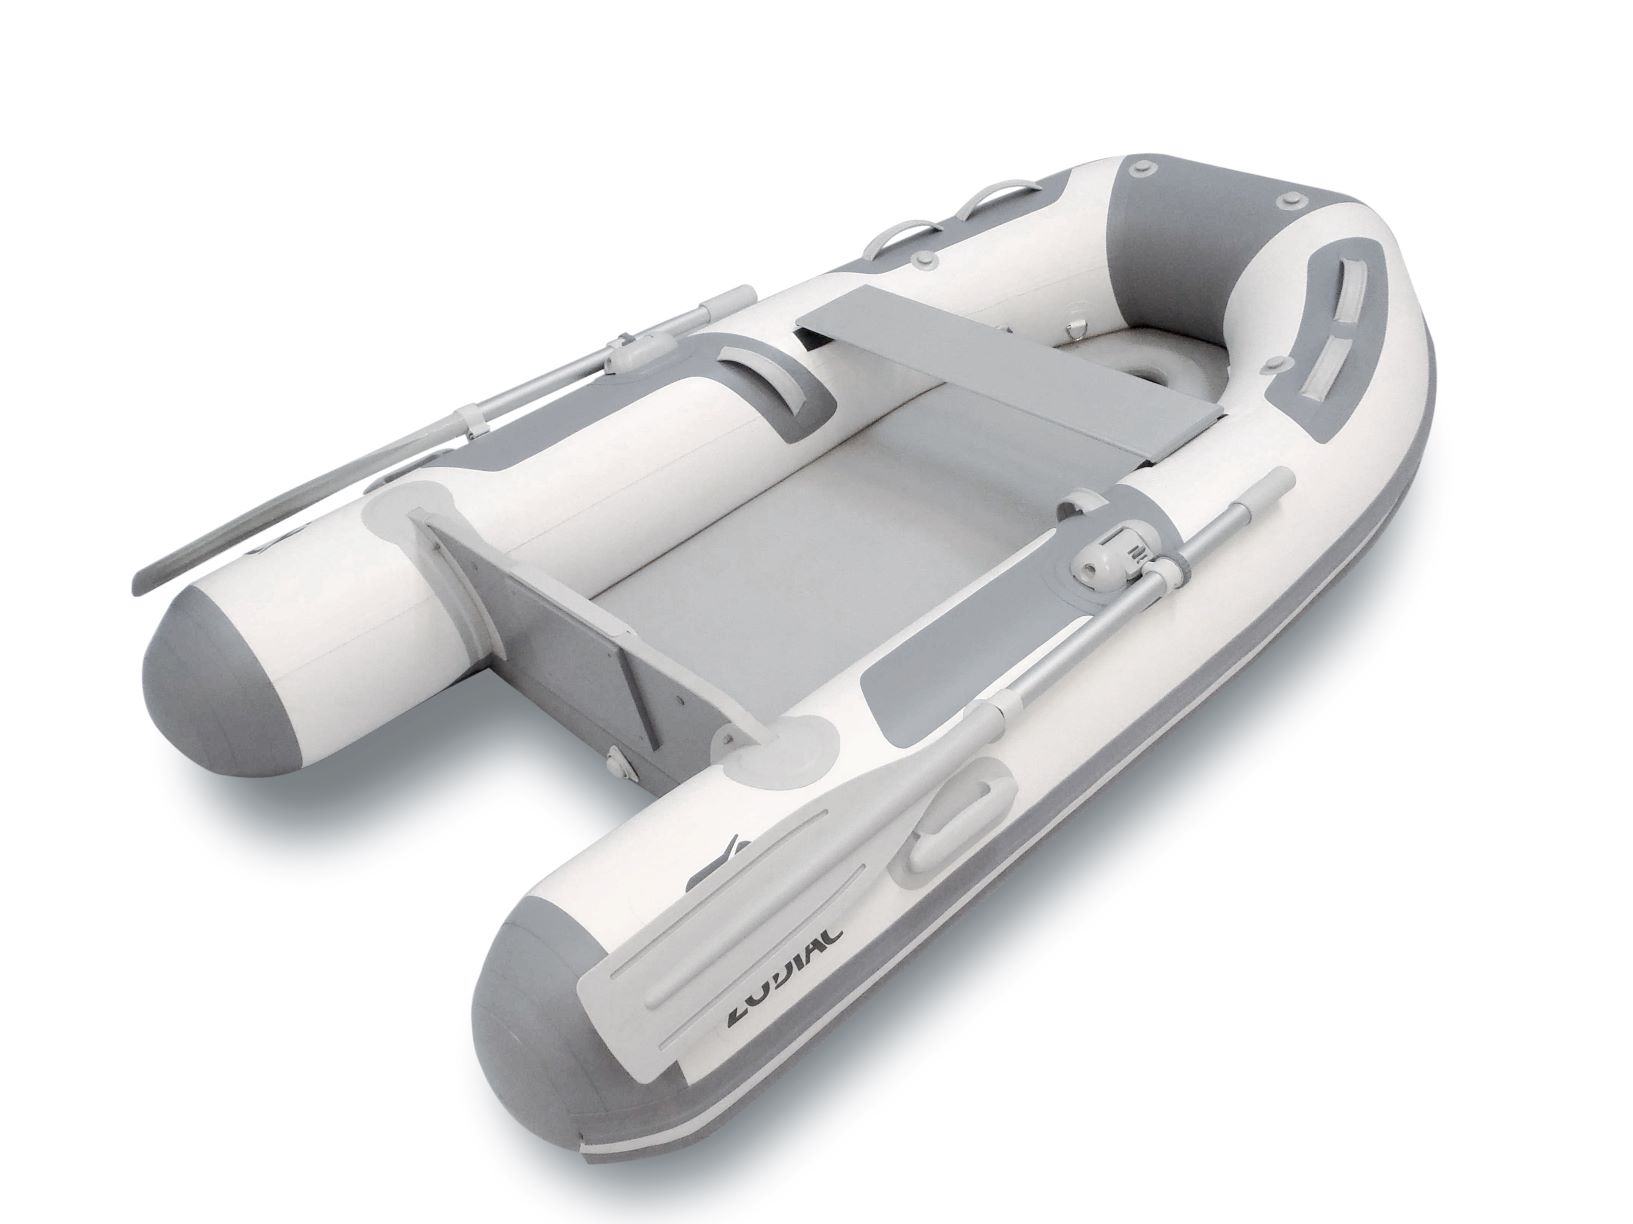 Zodiac CADET 310 Air Deck Floor 3.1M Inflatable Sports Boat Sib (Max 5 Persons) IN STOCK